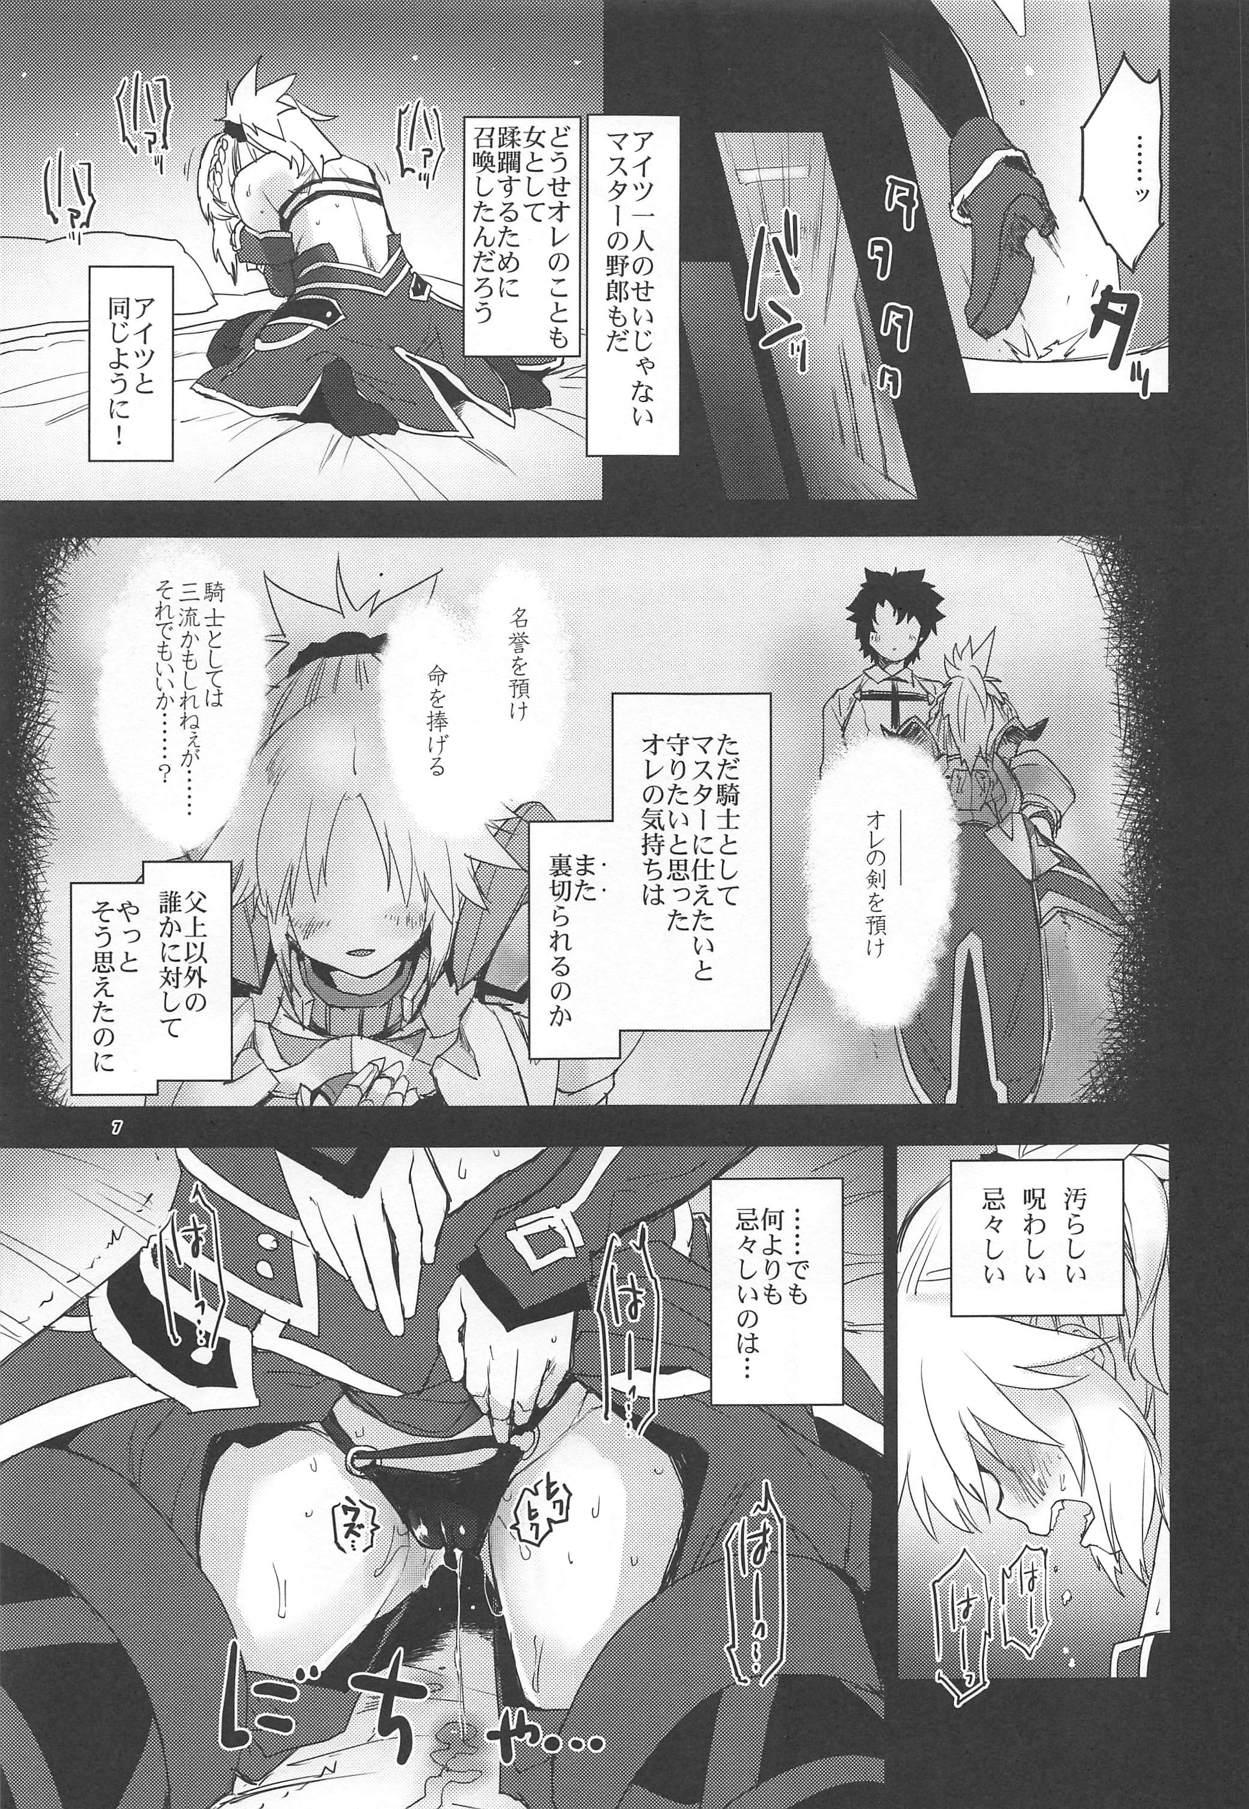 Puba With My Honey Knight - Fate grand order Gay Outinpublic - Page 6